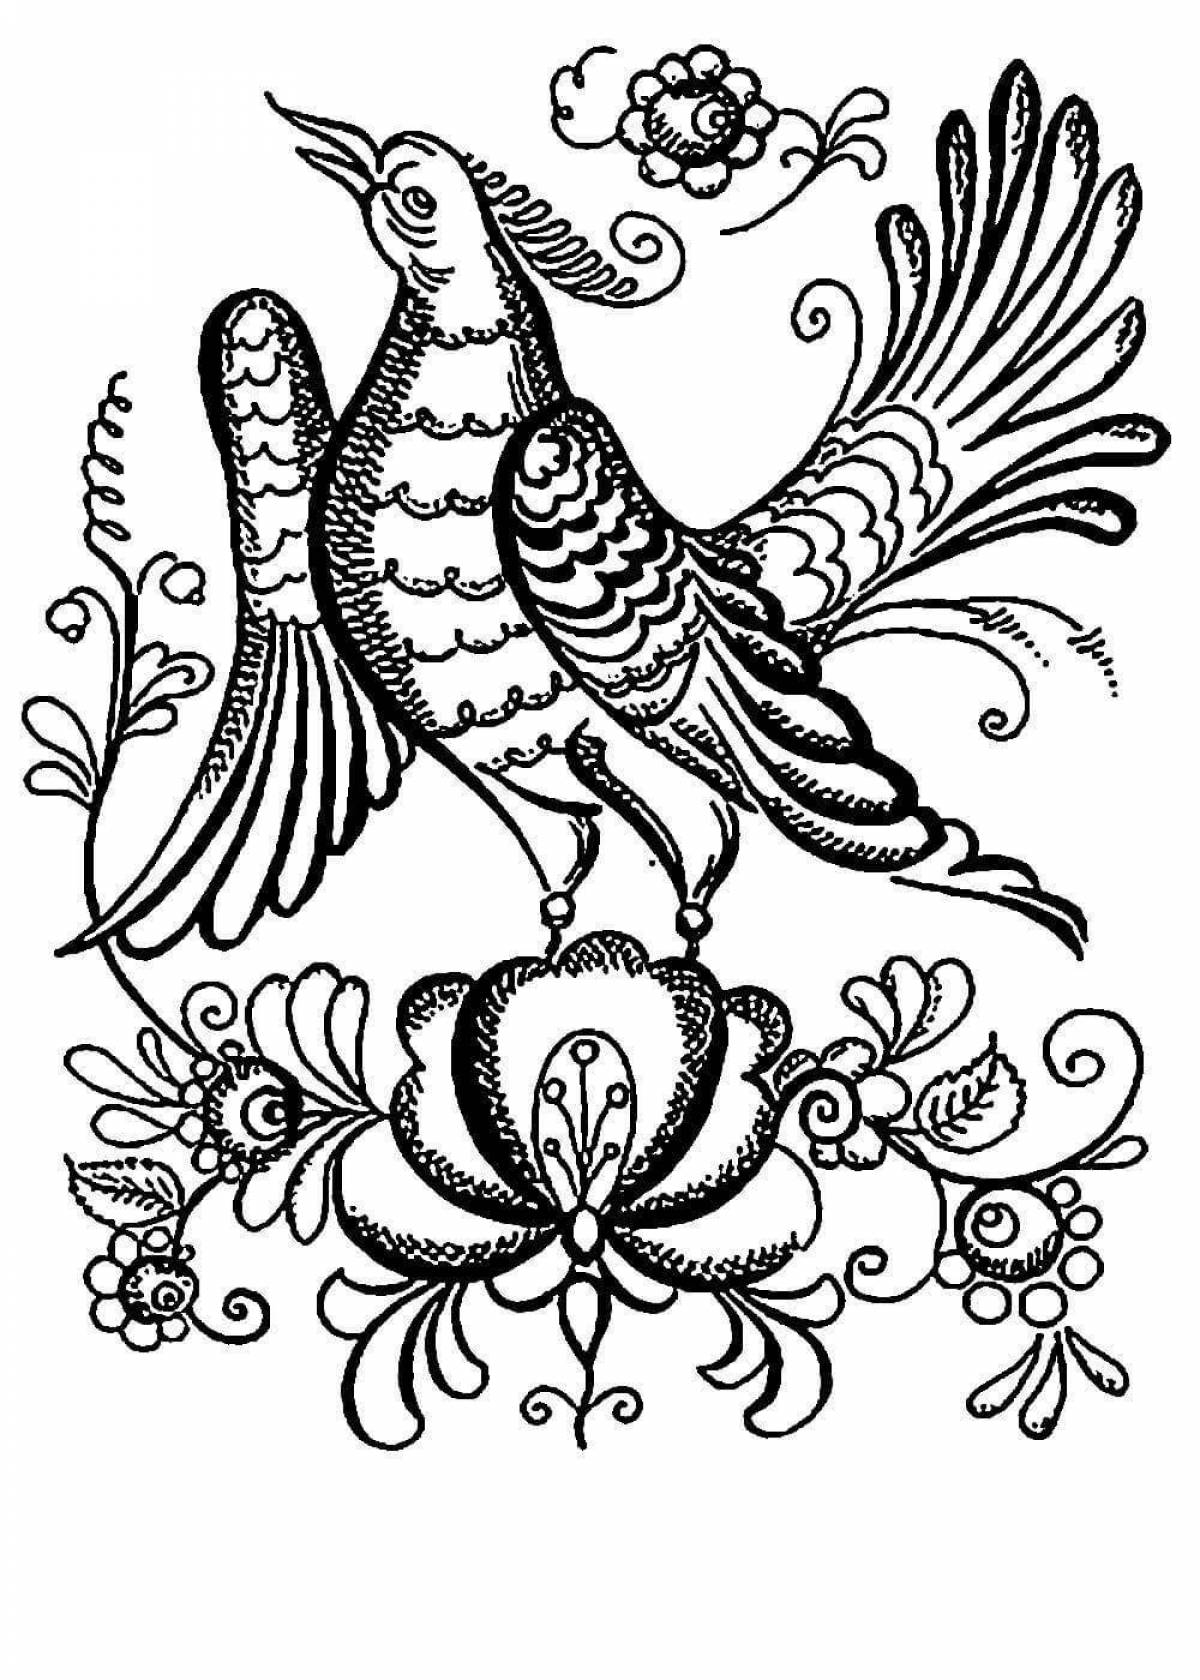 Coloring page delightful gzhel rooster